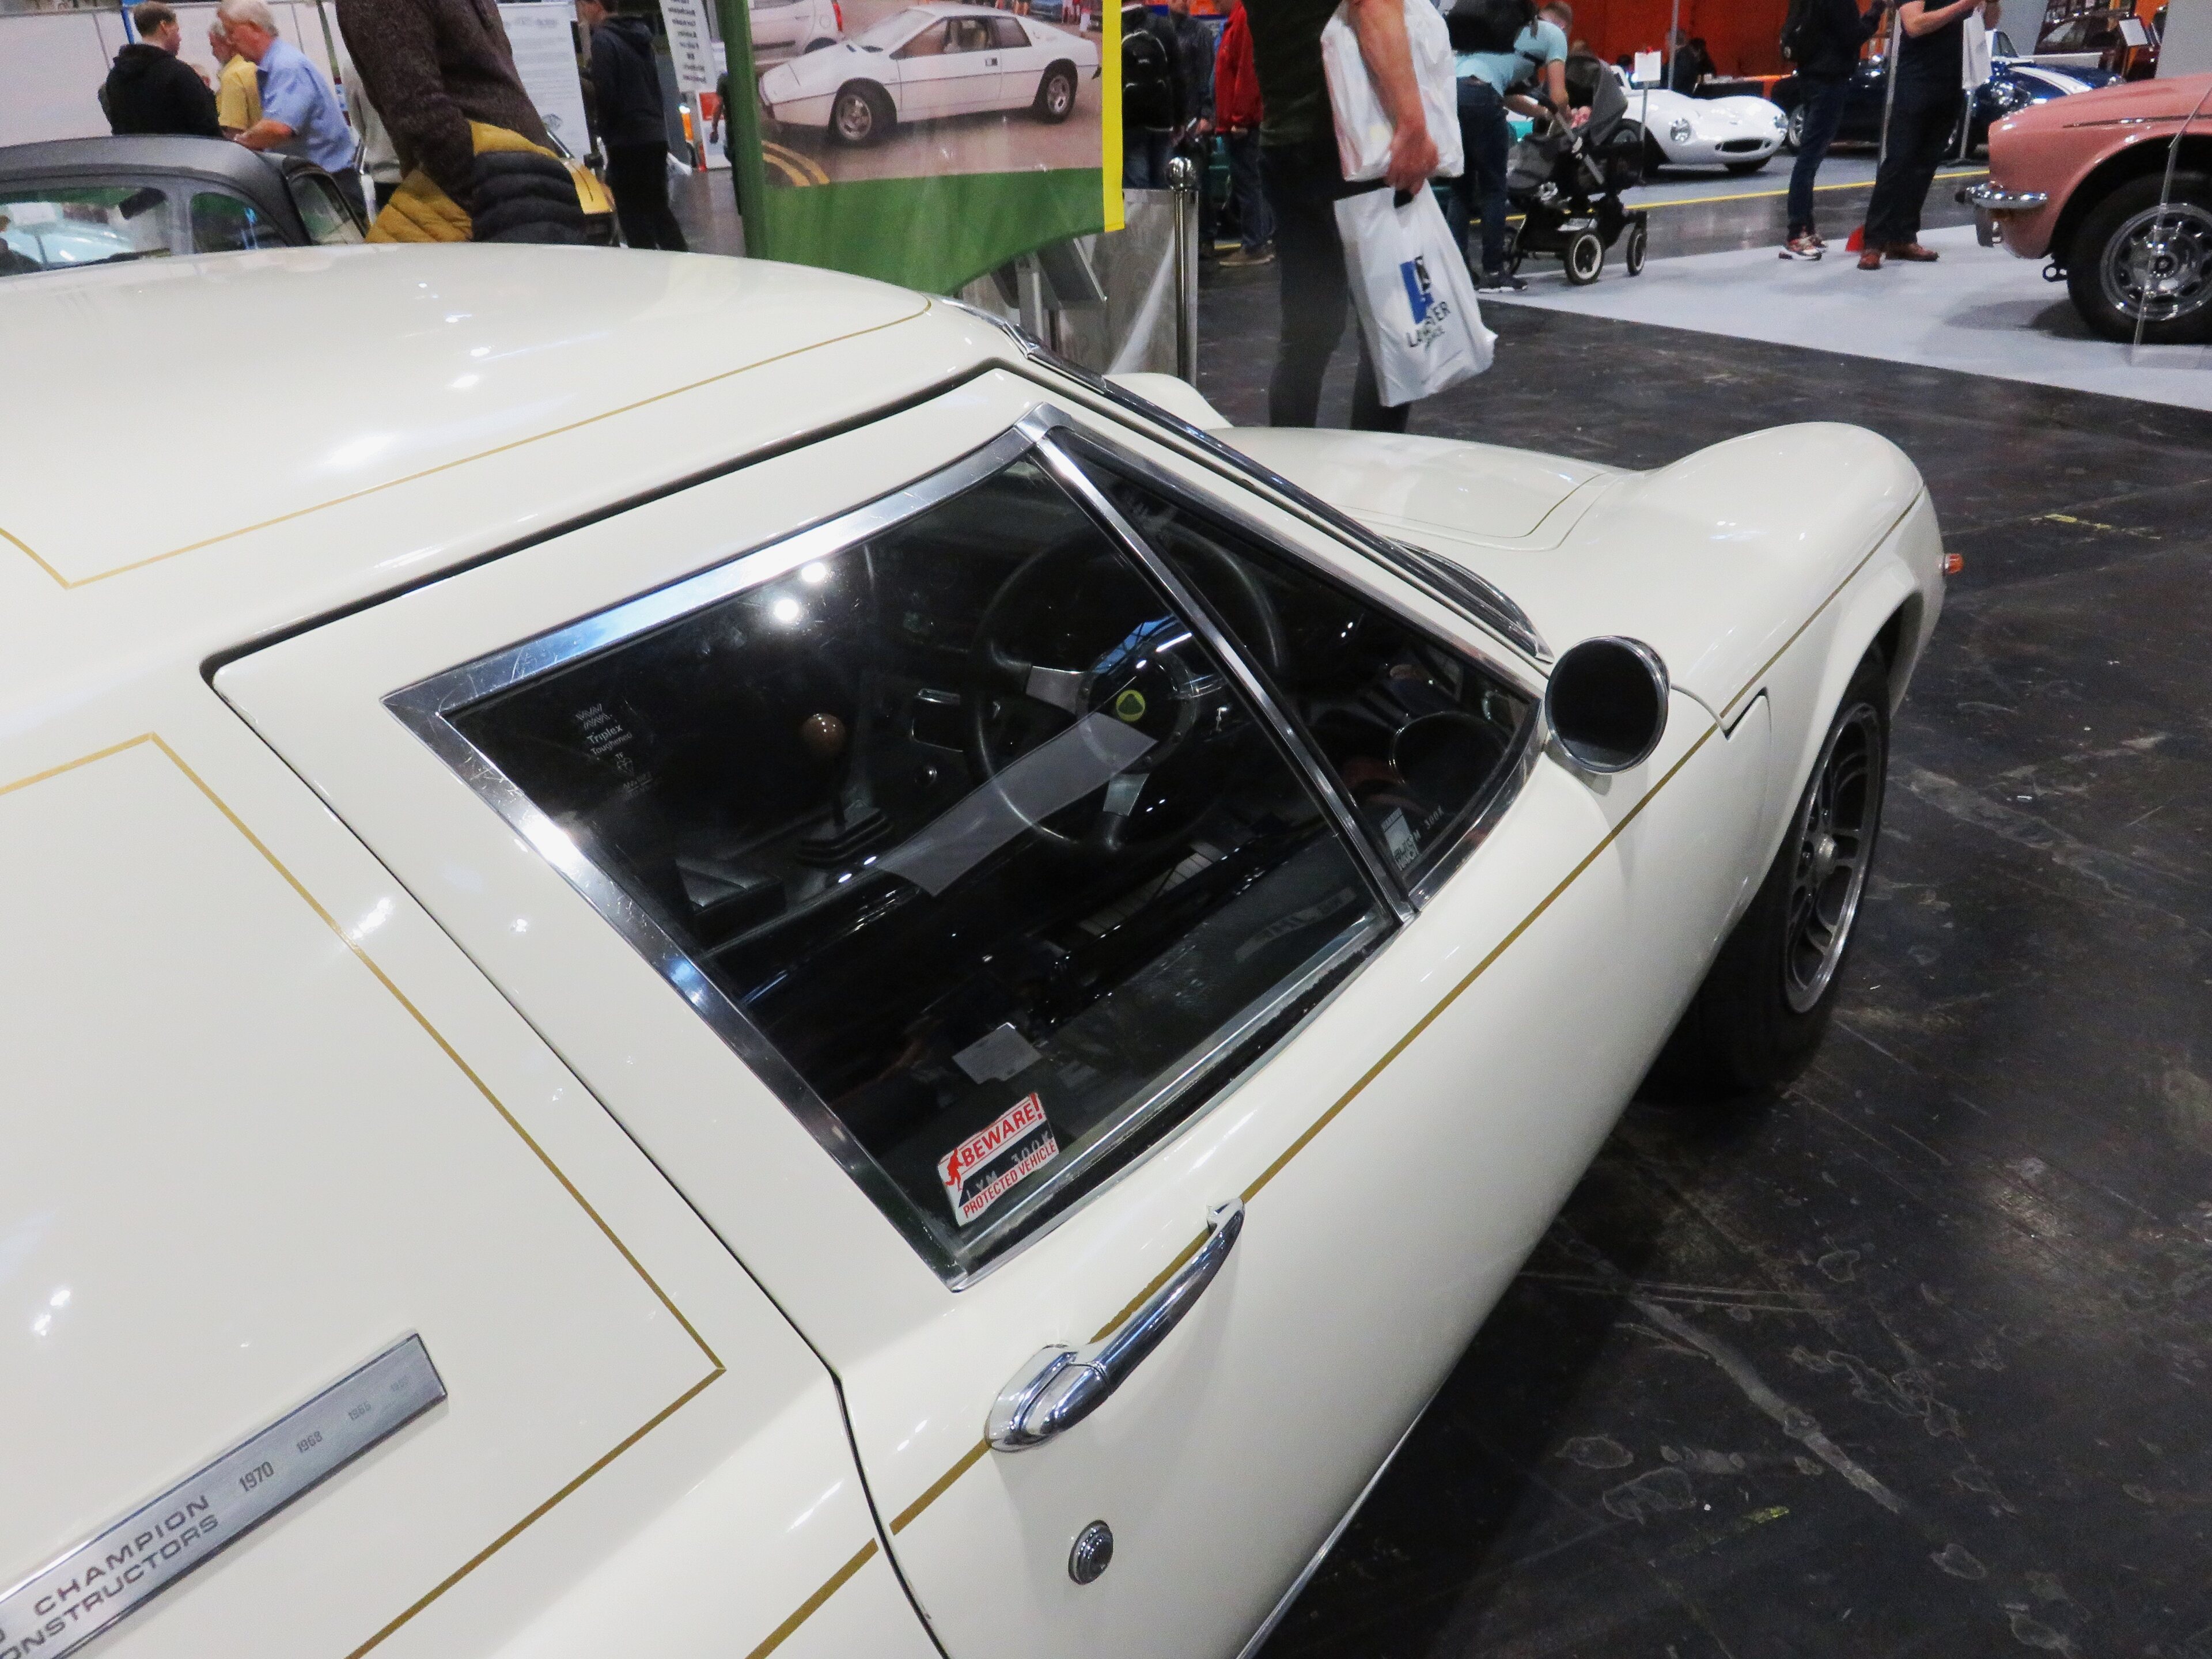 NEC show photos... - Page 1 - Classic Cars and Yesterday's Heroes - PistonHeads UK